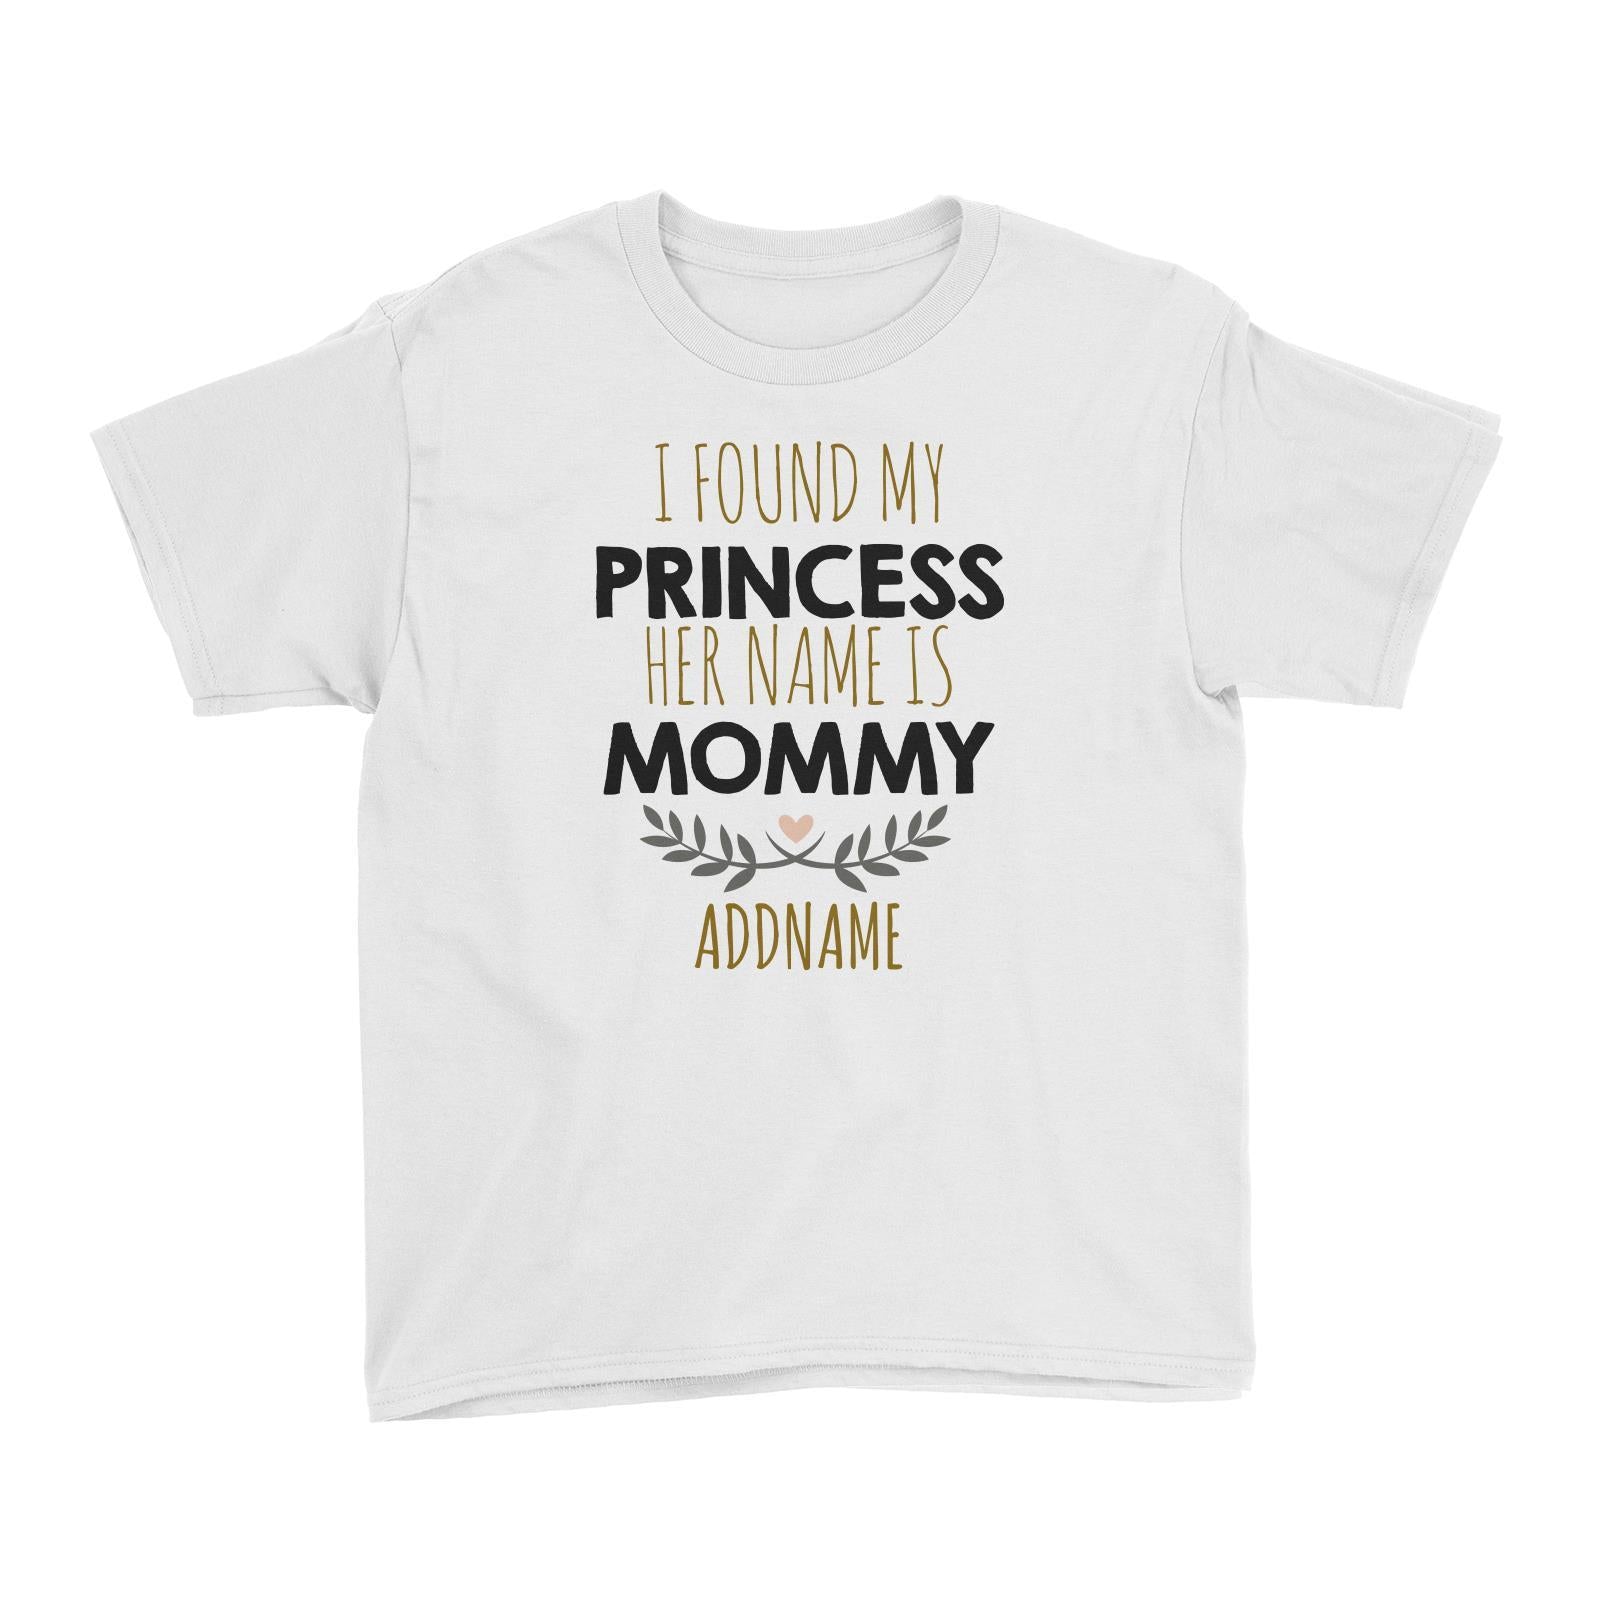 I Found My Princess Her Name is Mommy Addname Kid's T-Shirt